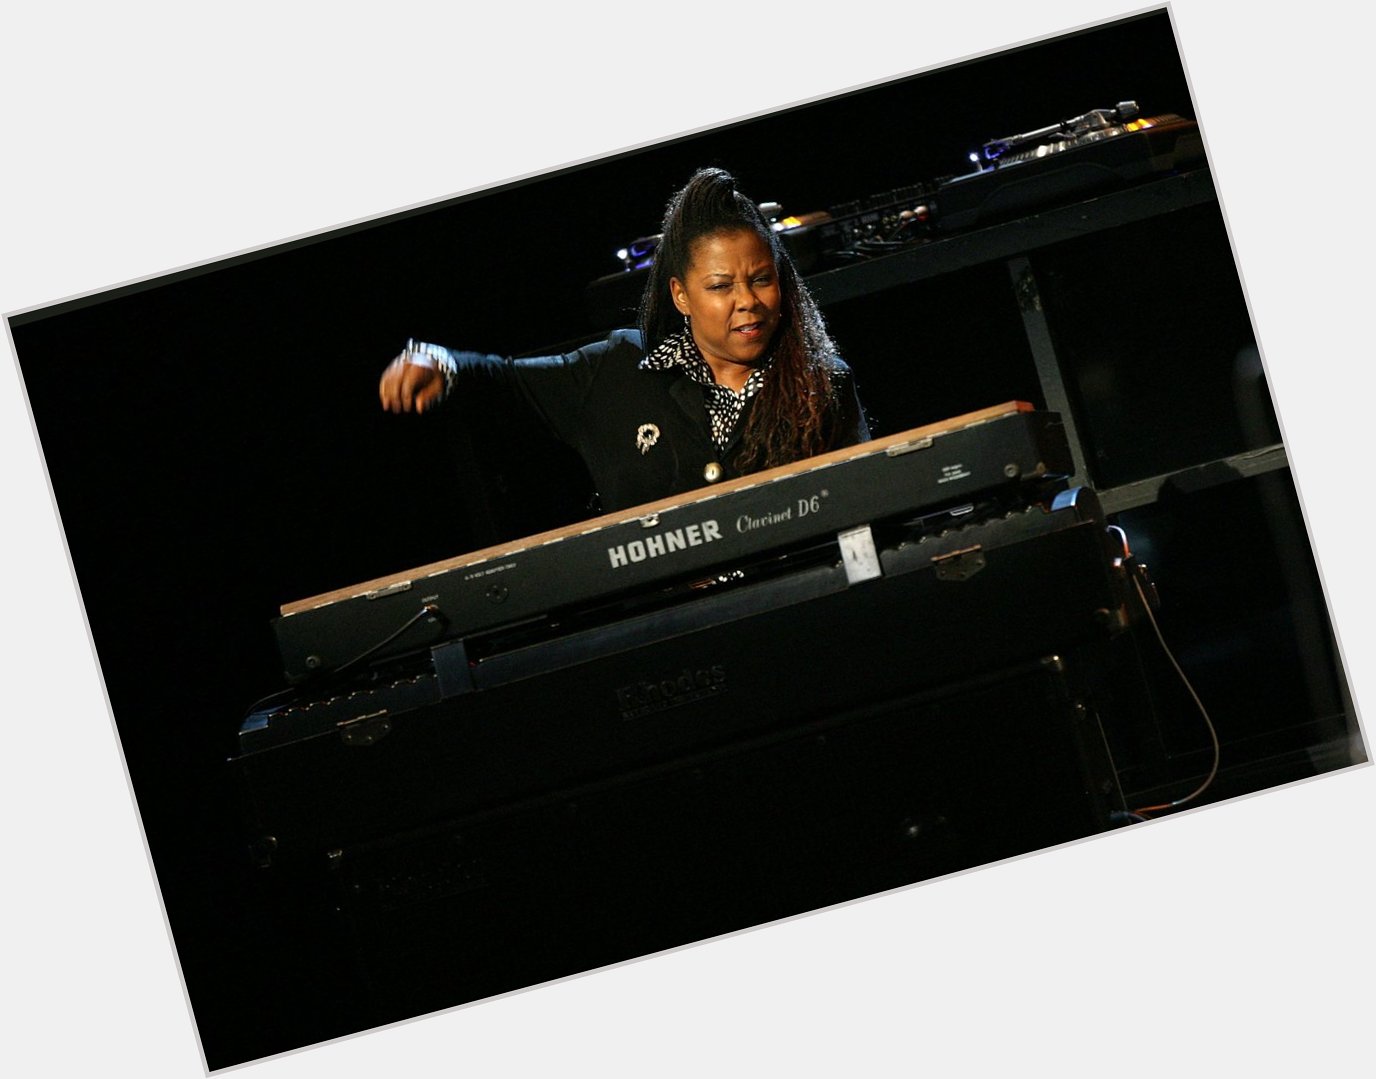 We send a huge happy birthday out to Patrice Rushen. She was born on this day in 1954! 